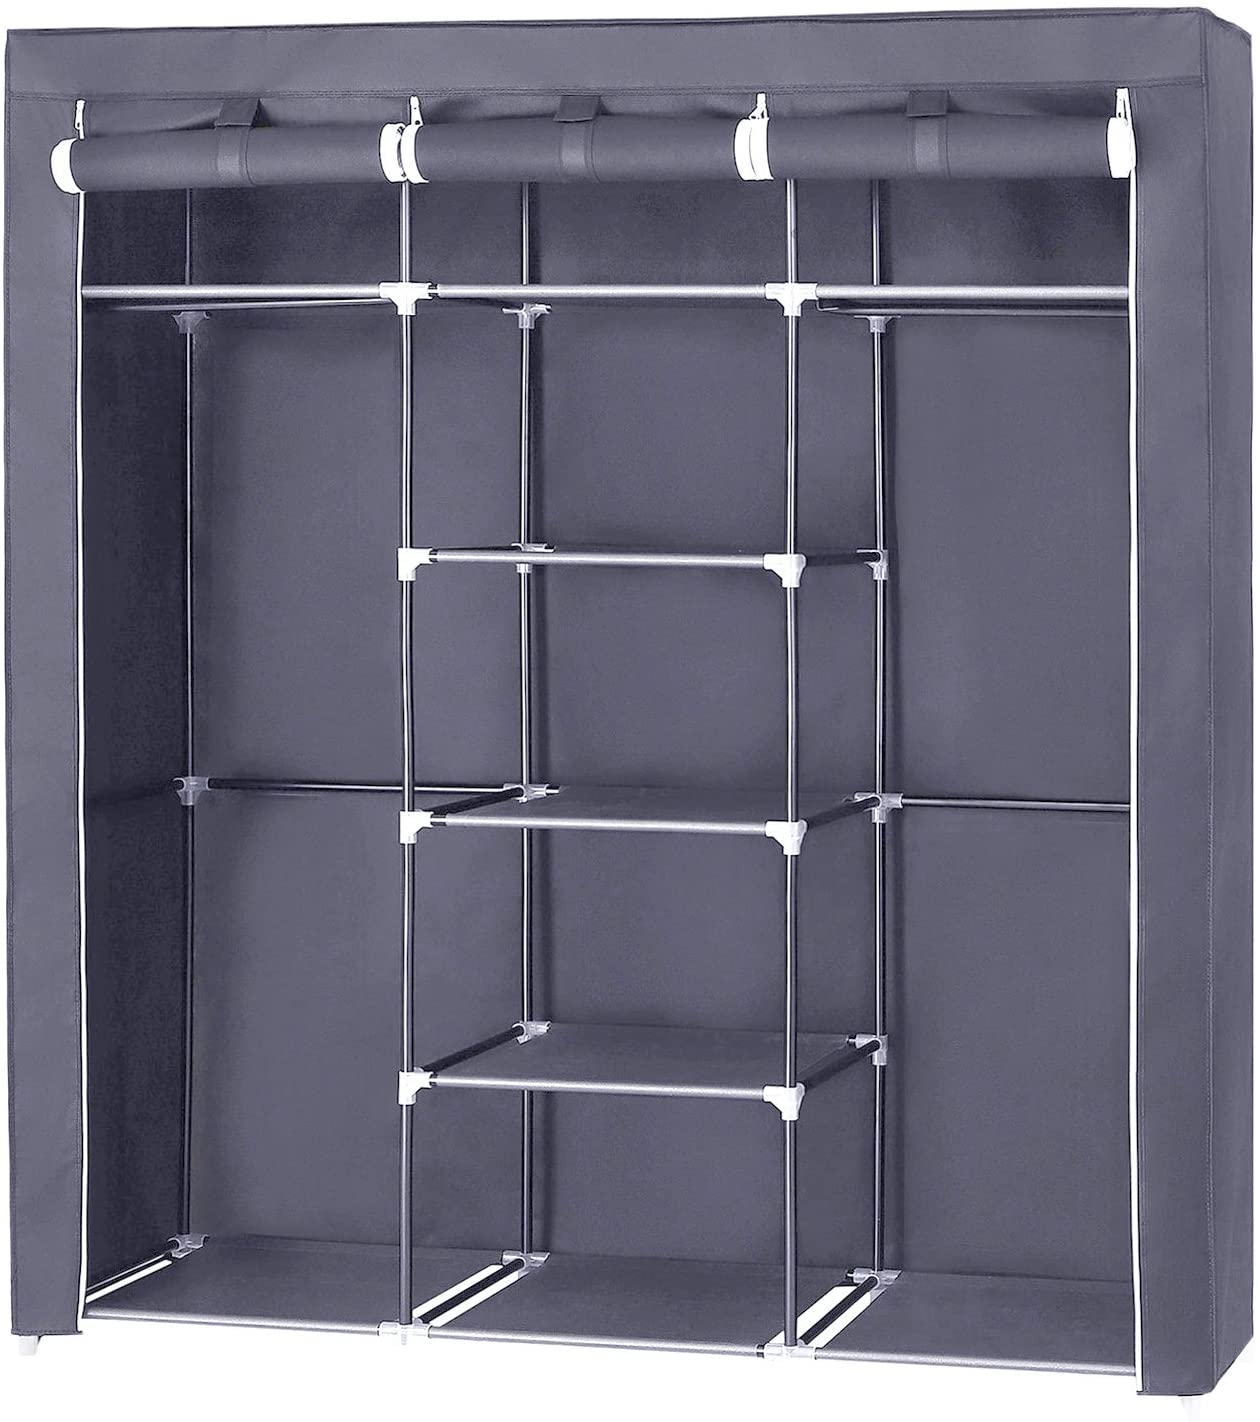 Hot Sell High-Quality Closet Wardrobe with Cover with 6 Storage Shelves